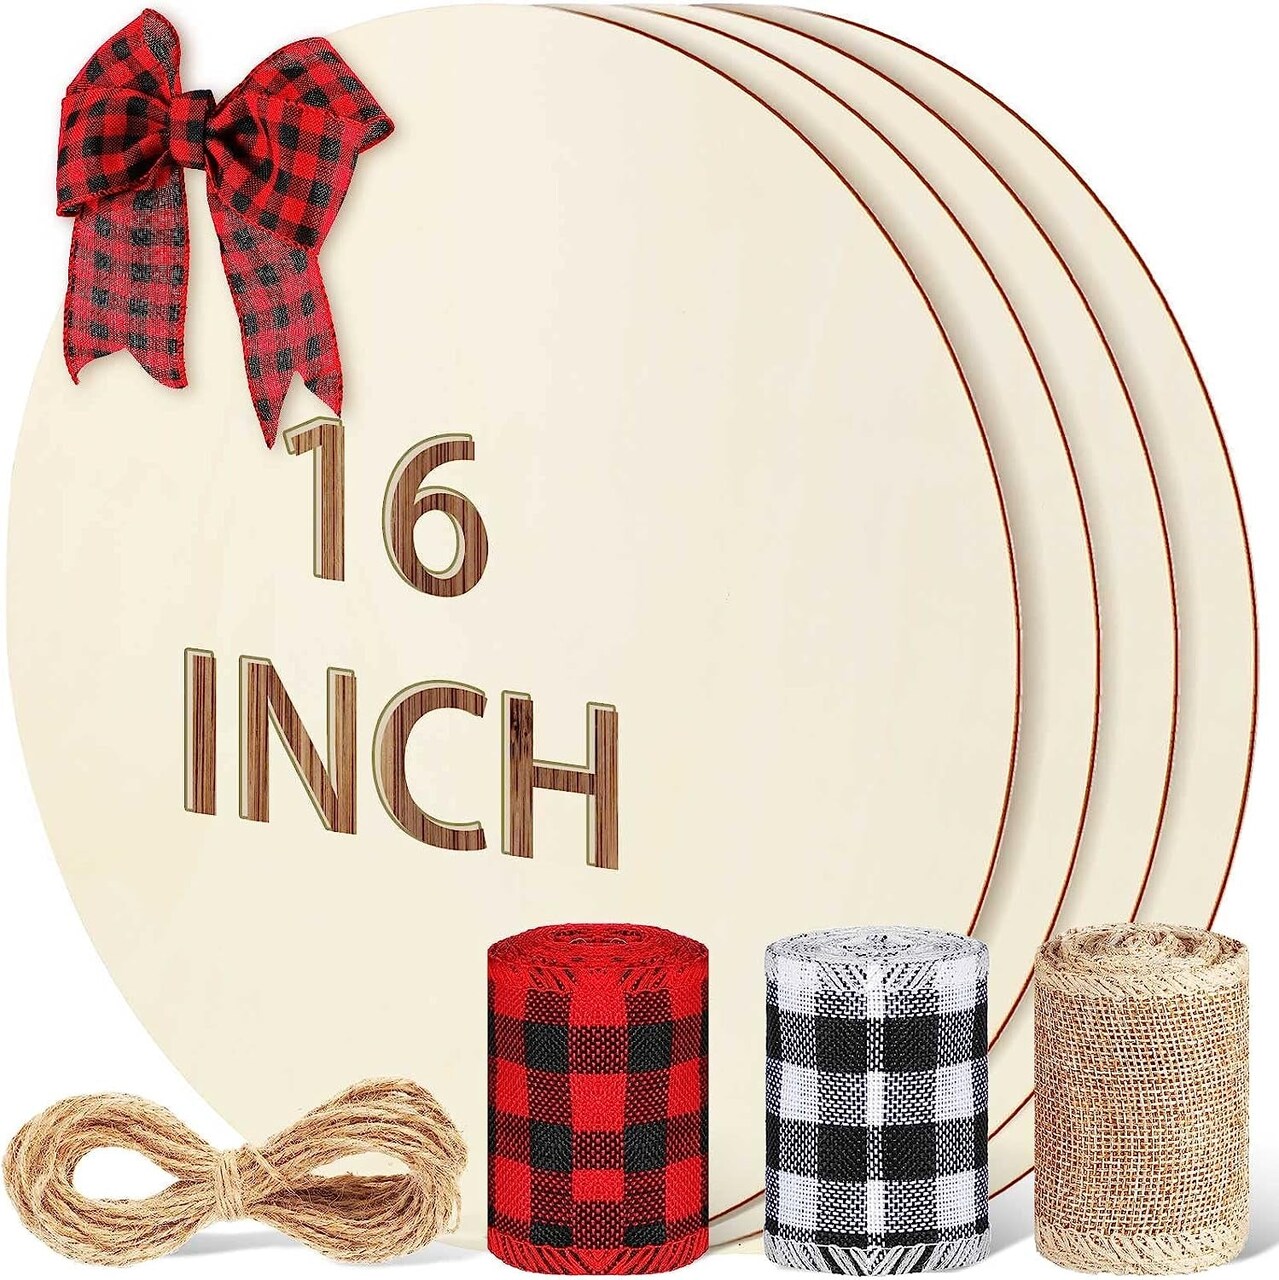 4 Pieces Wood Circles round Wood Discs Unfinished Wooden Circle Rustic Rounds  Wooden Cutouts Blank Wood Plaque with 3 Rolls Burlap Plaid Wired Edge  Ribbons for Christmas (15.75 X 15.75 X 0.1 Inch)